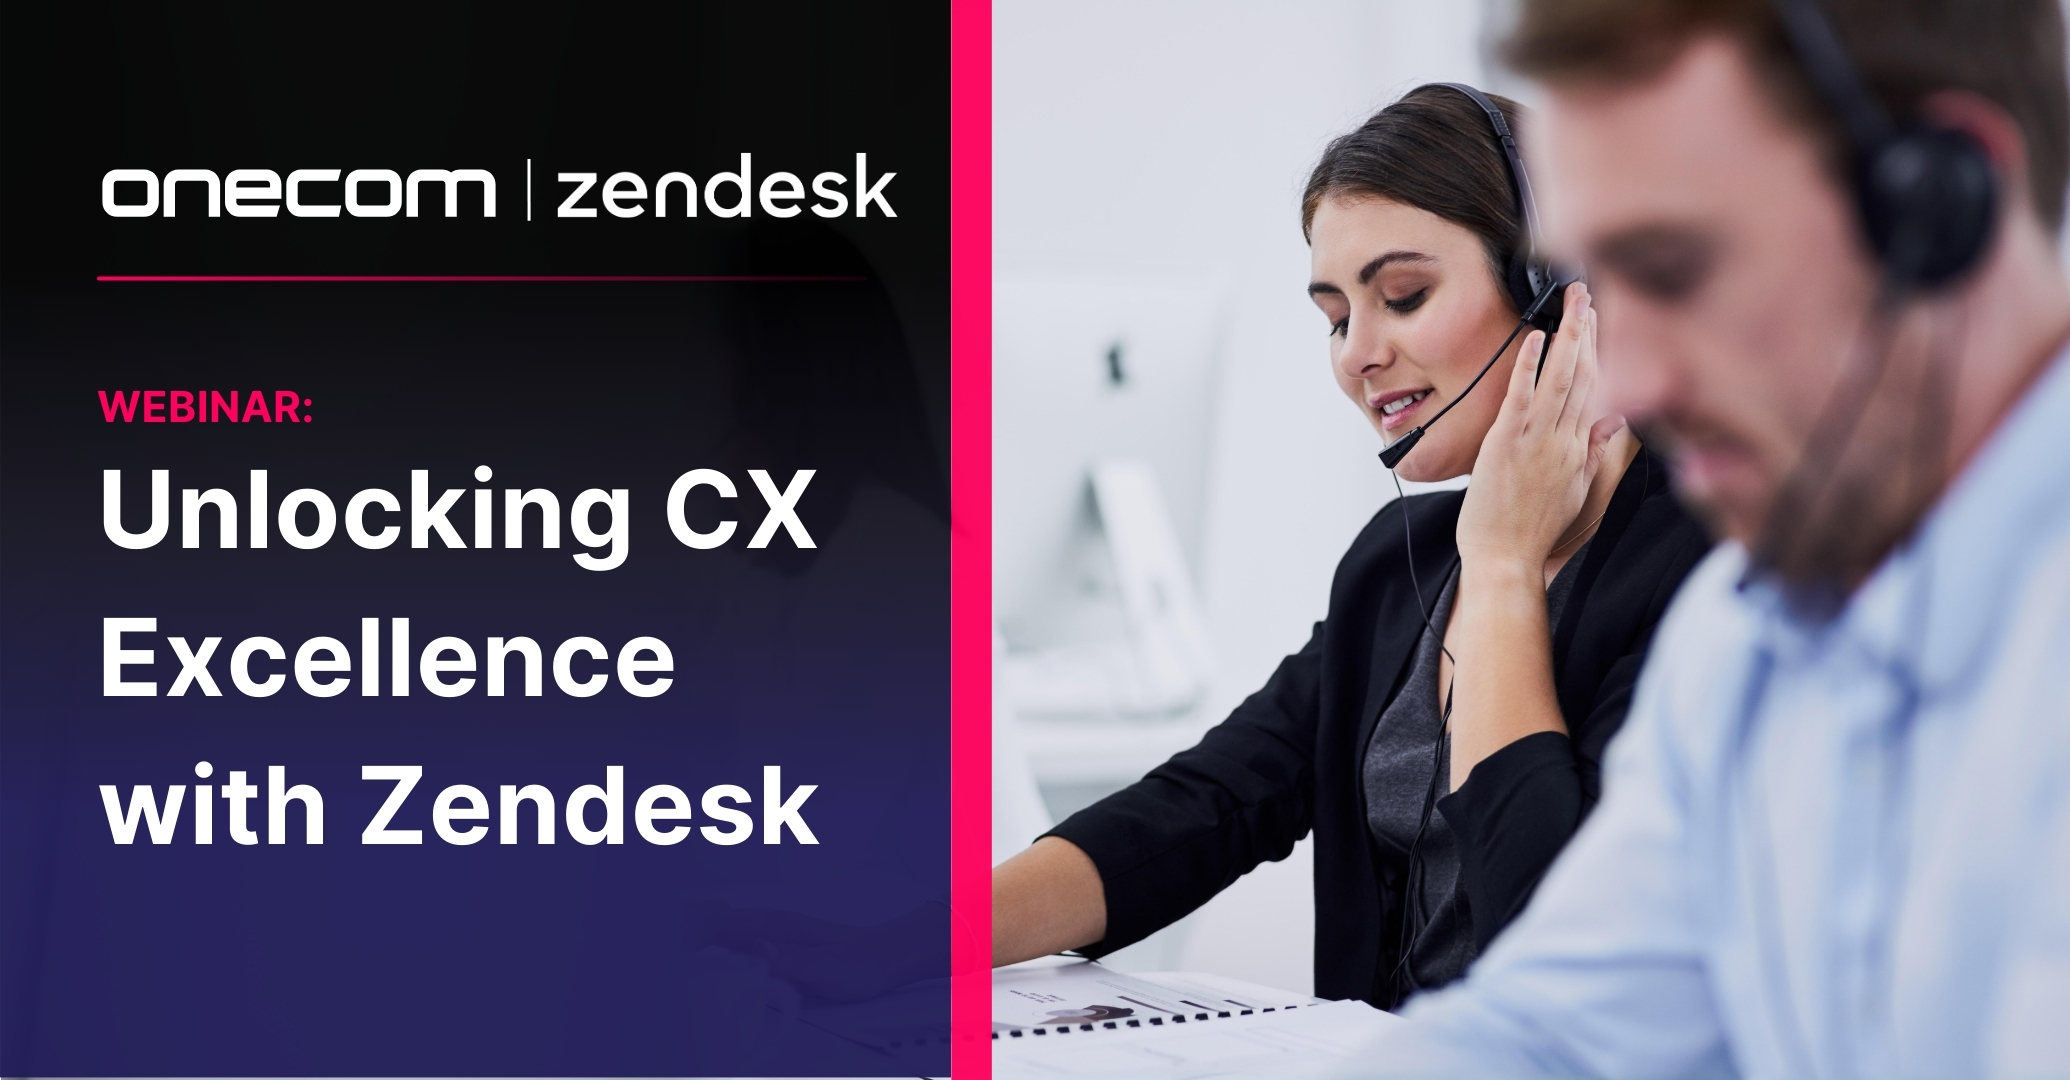 Unlocking CX Excellence with Zendesk: Pioneering the Future of Data Privacy and Customer Interactions